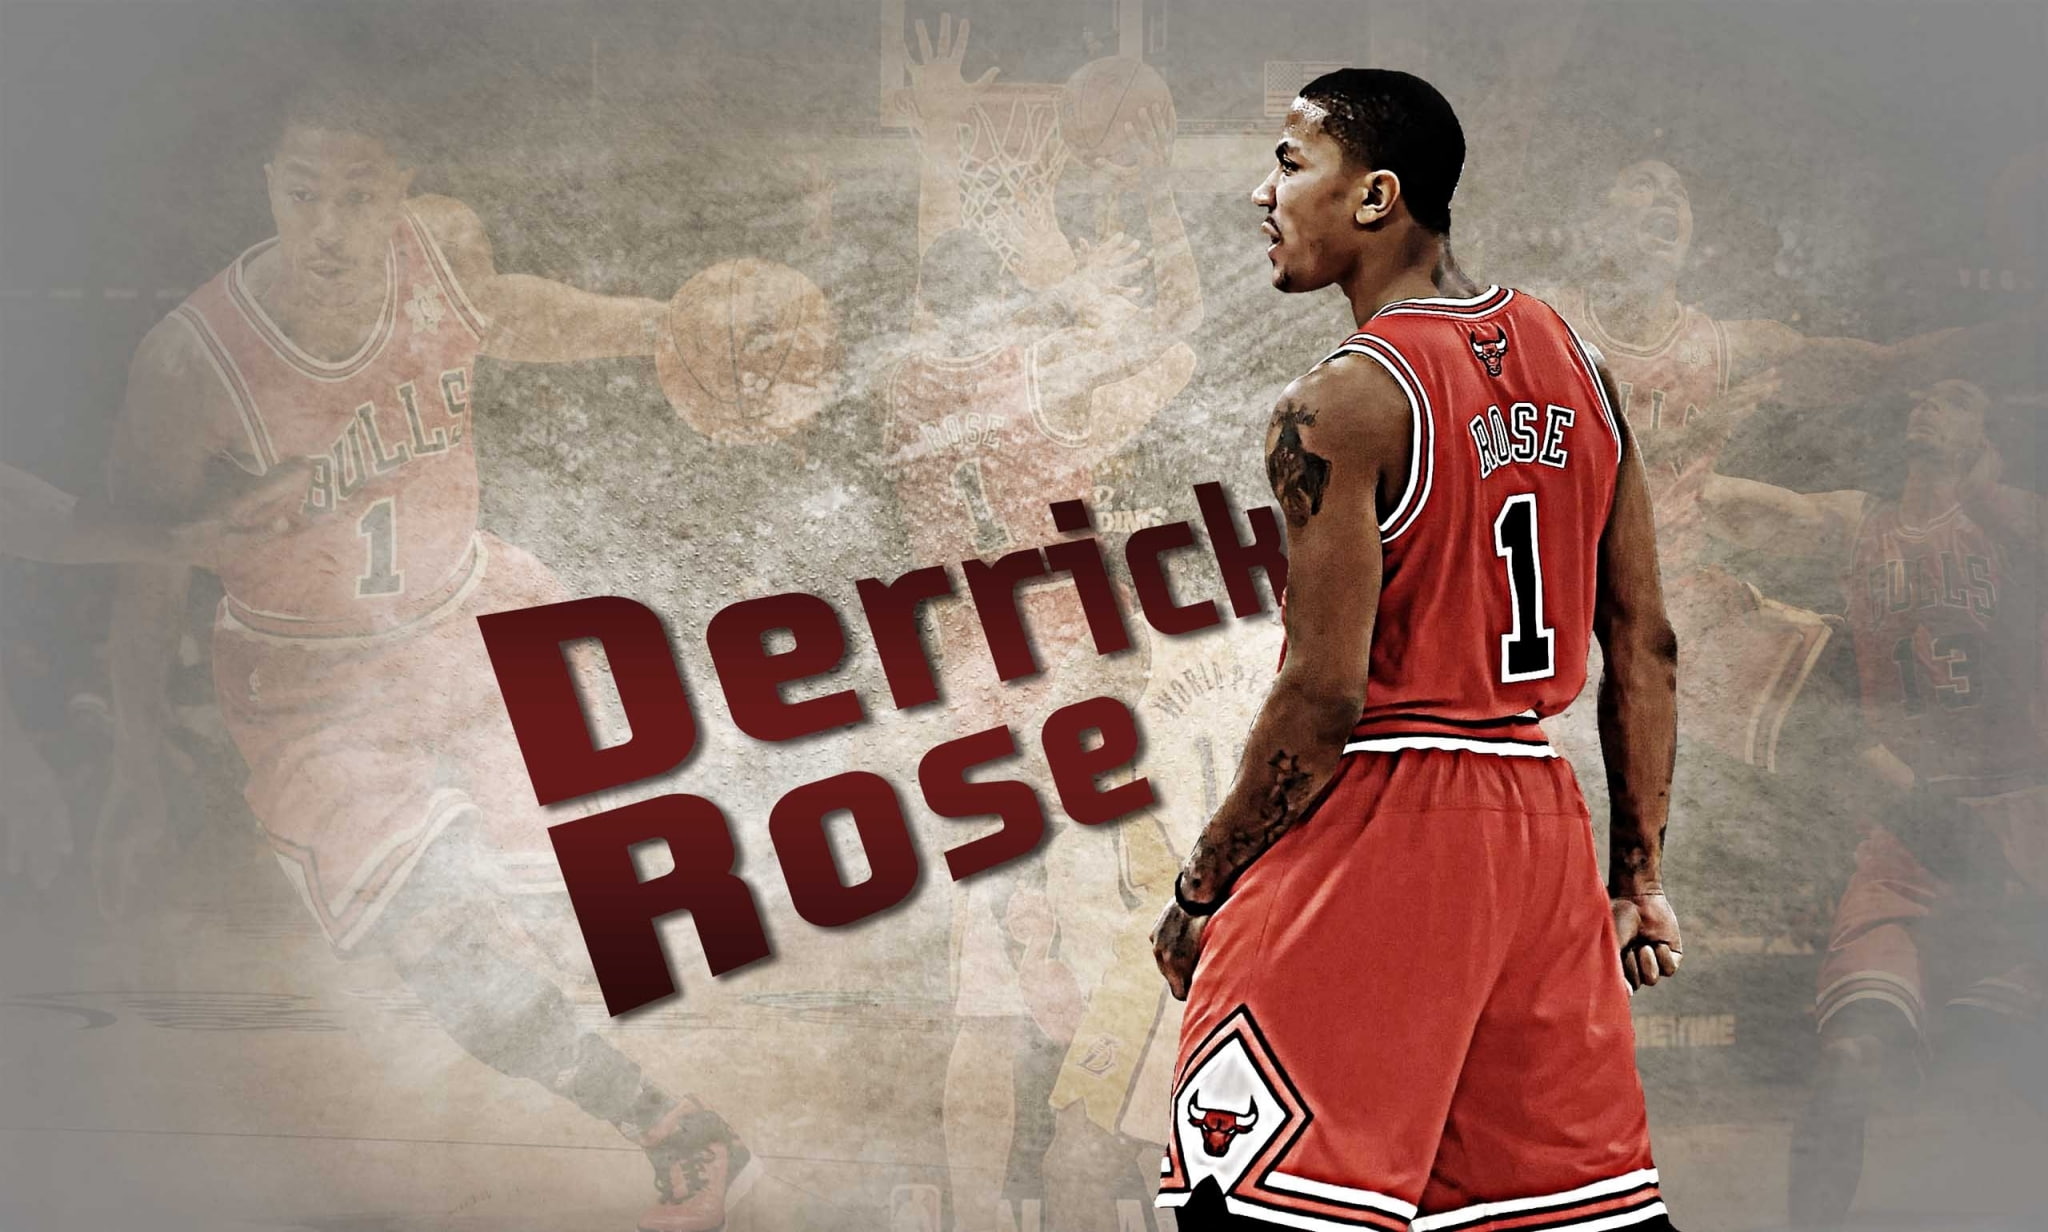 derrick rose theme picture, architecture, young adult, one person